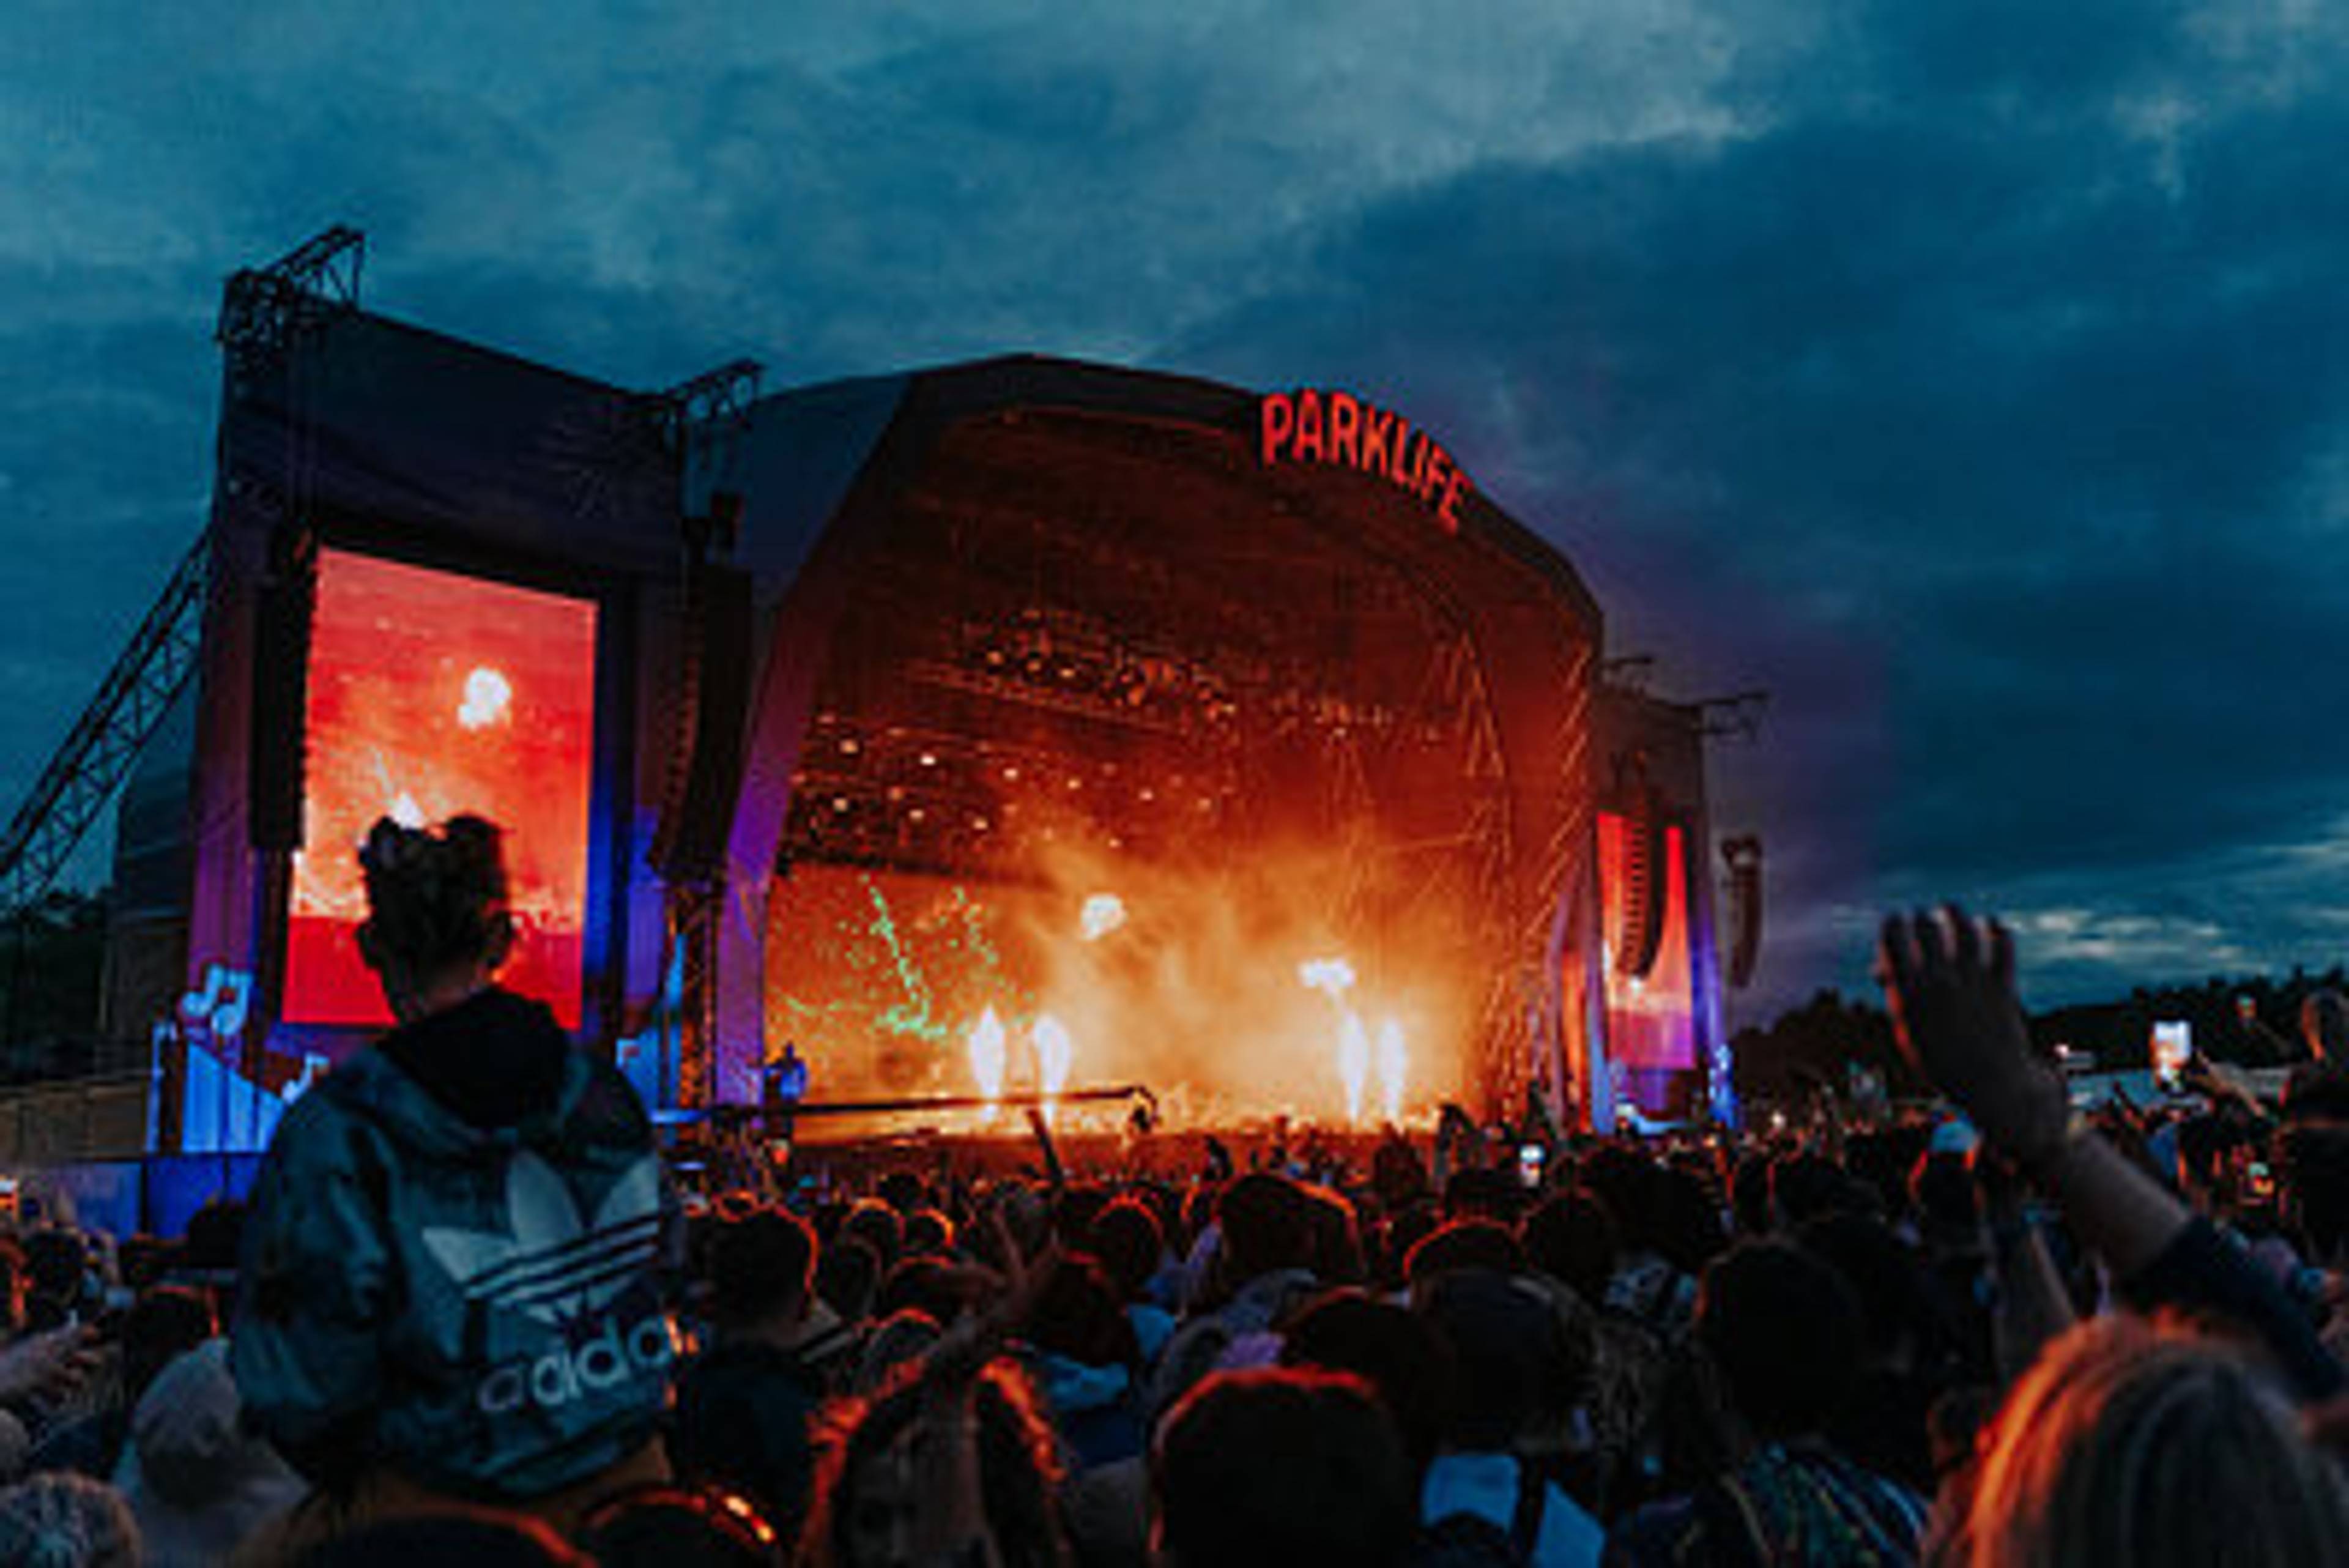 Parklife festival stage at night